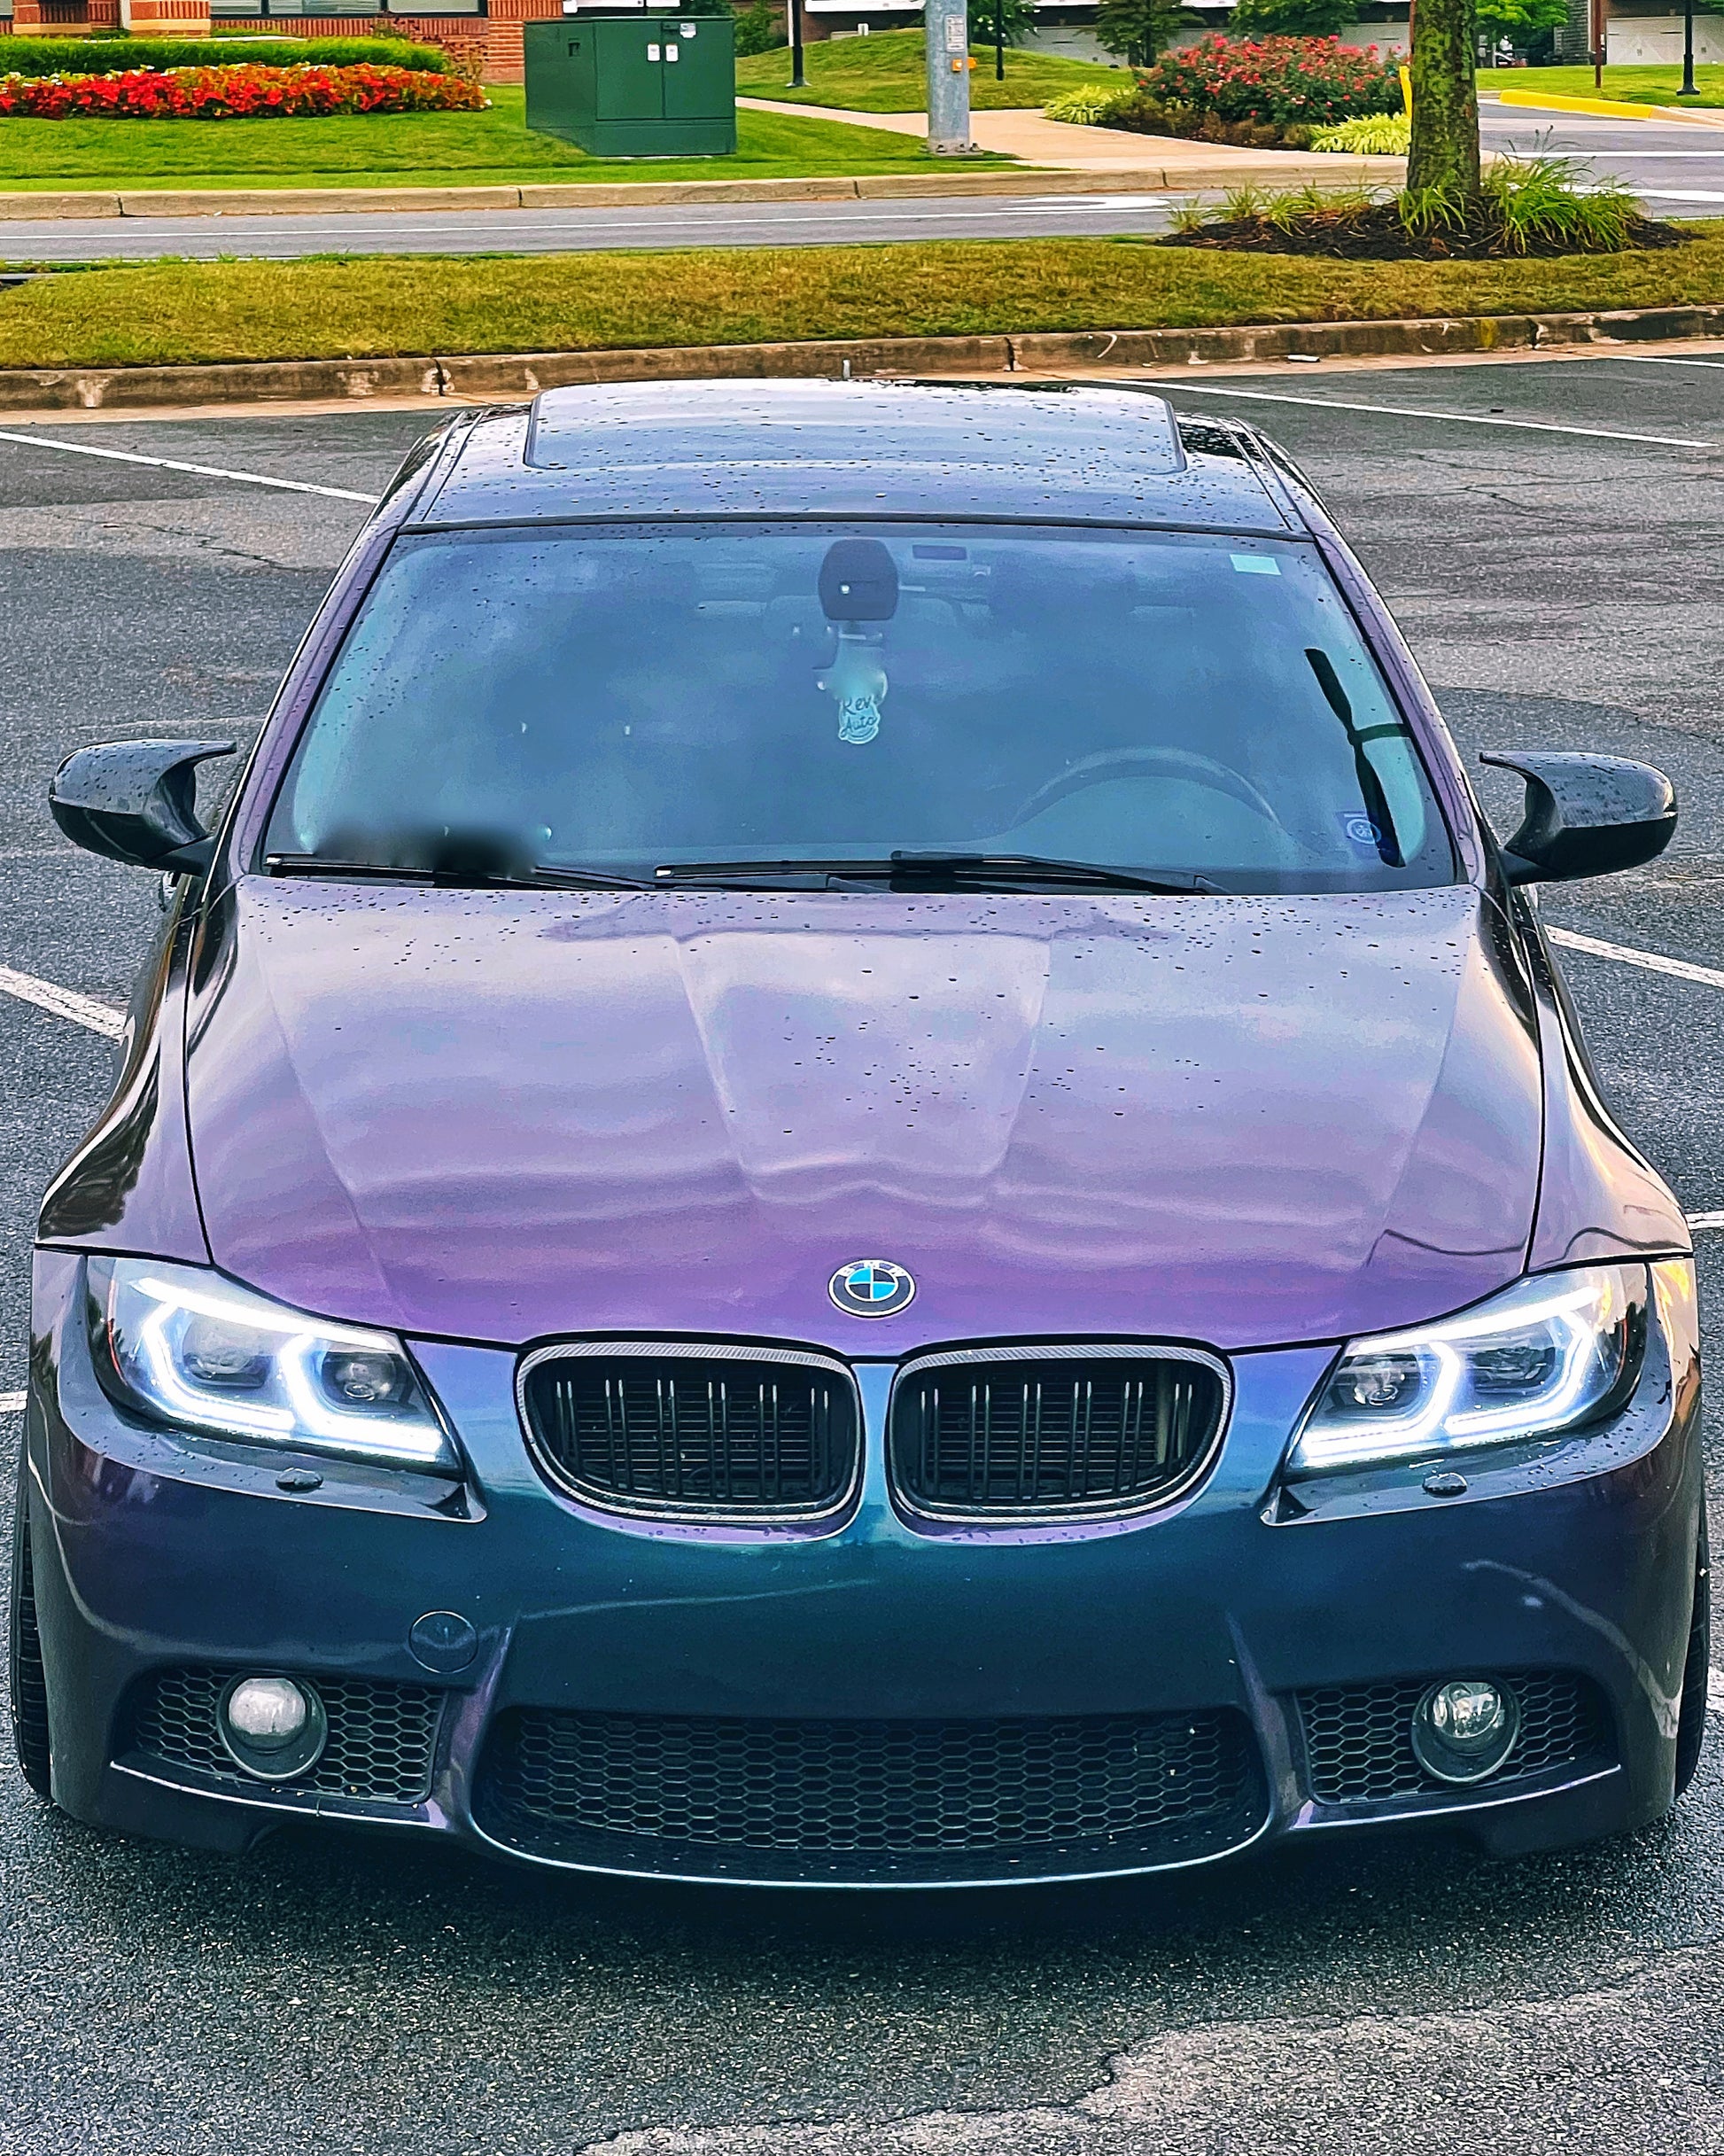 Angel Eyes (rings) V2 LED pack for BMW 3 Series (E90 - E91) Phase 2 (LCI) -  Without original mount xenon